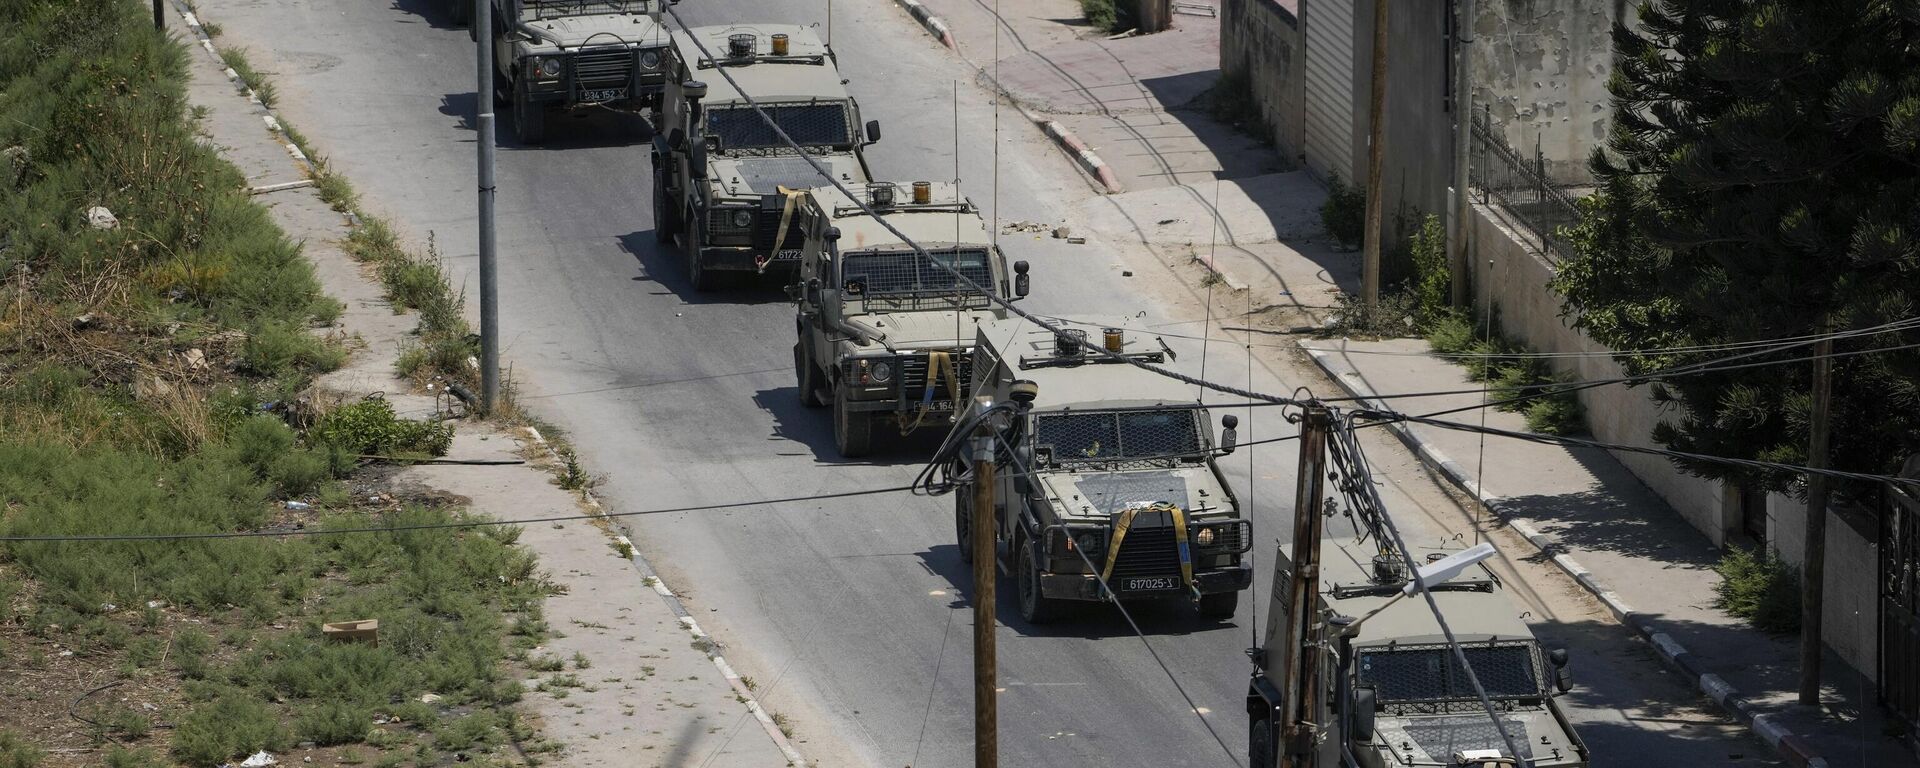 A convoy of army vehicles is seen during an Israeli military raid on the militant stronghold of the Jenin refugee camp in the occupied West Bank, Monday, July 3, 2023. Israeli drones struck targets and deployed hundreds of troops in the area in the largest operation in the area in more than a year of fighting. Palestinian health officials said at least eight Palestinians were killed. - Sputnik International, 1920, 04.07.2023